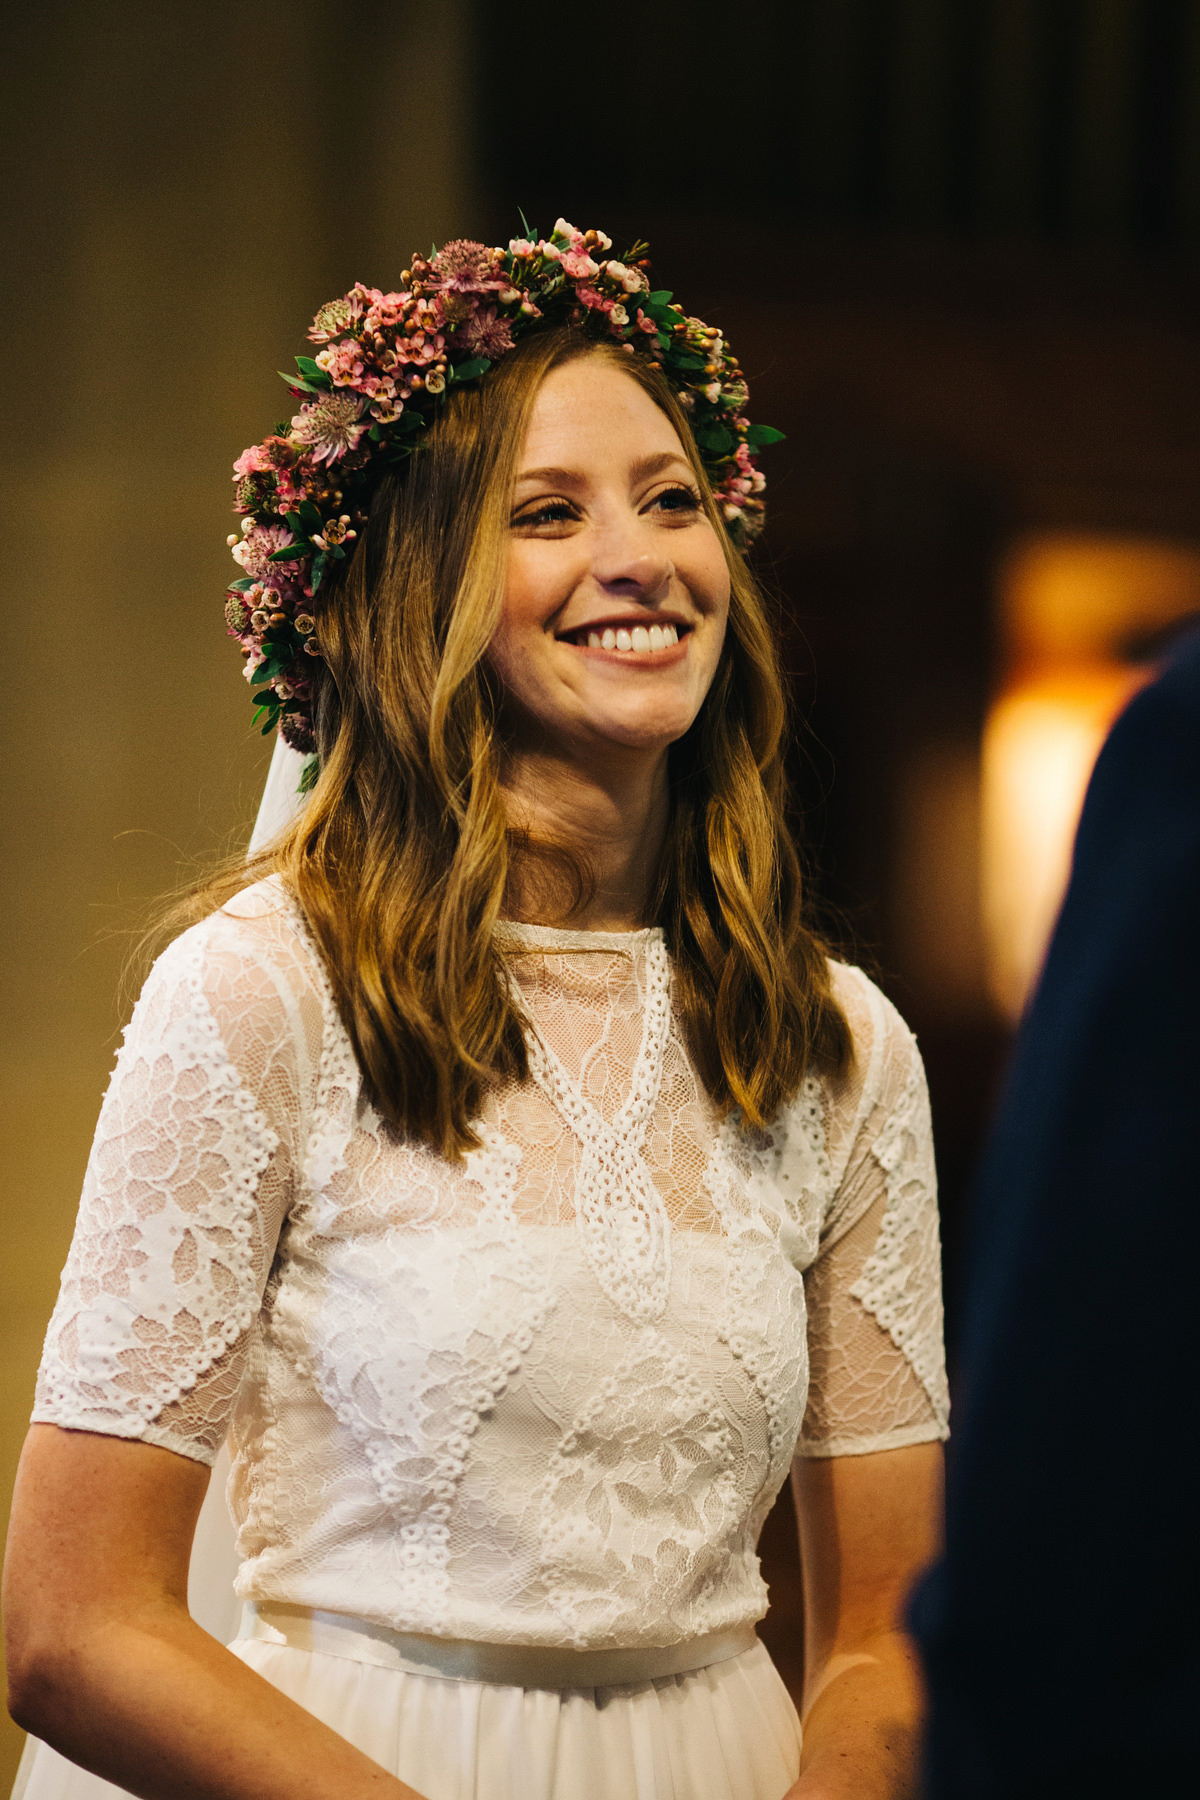 Sarah wore a Grace Loves Lace dress for her rustic Dorset barn wedding with paper cranes. Photography by Richard Skins.